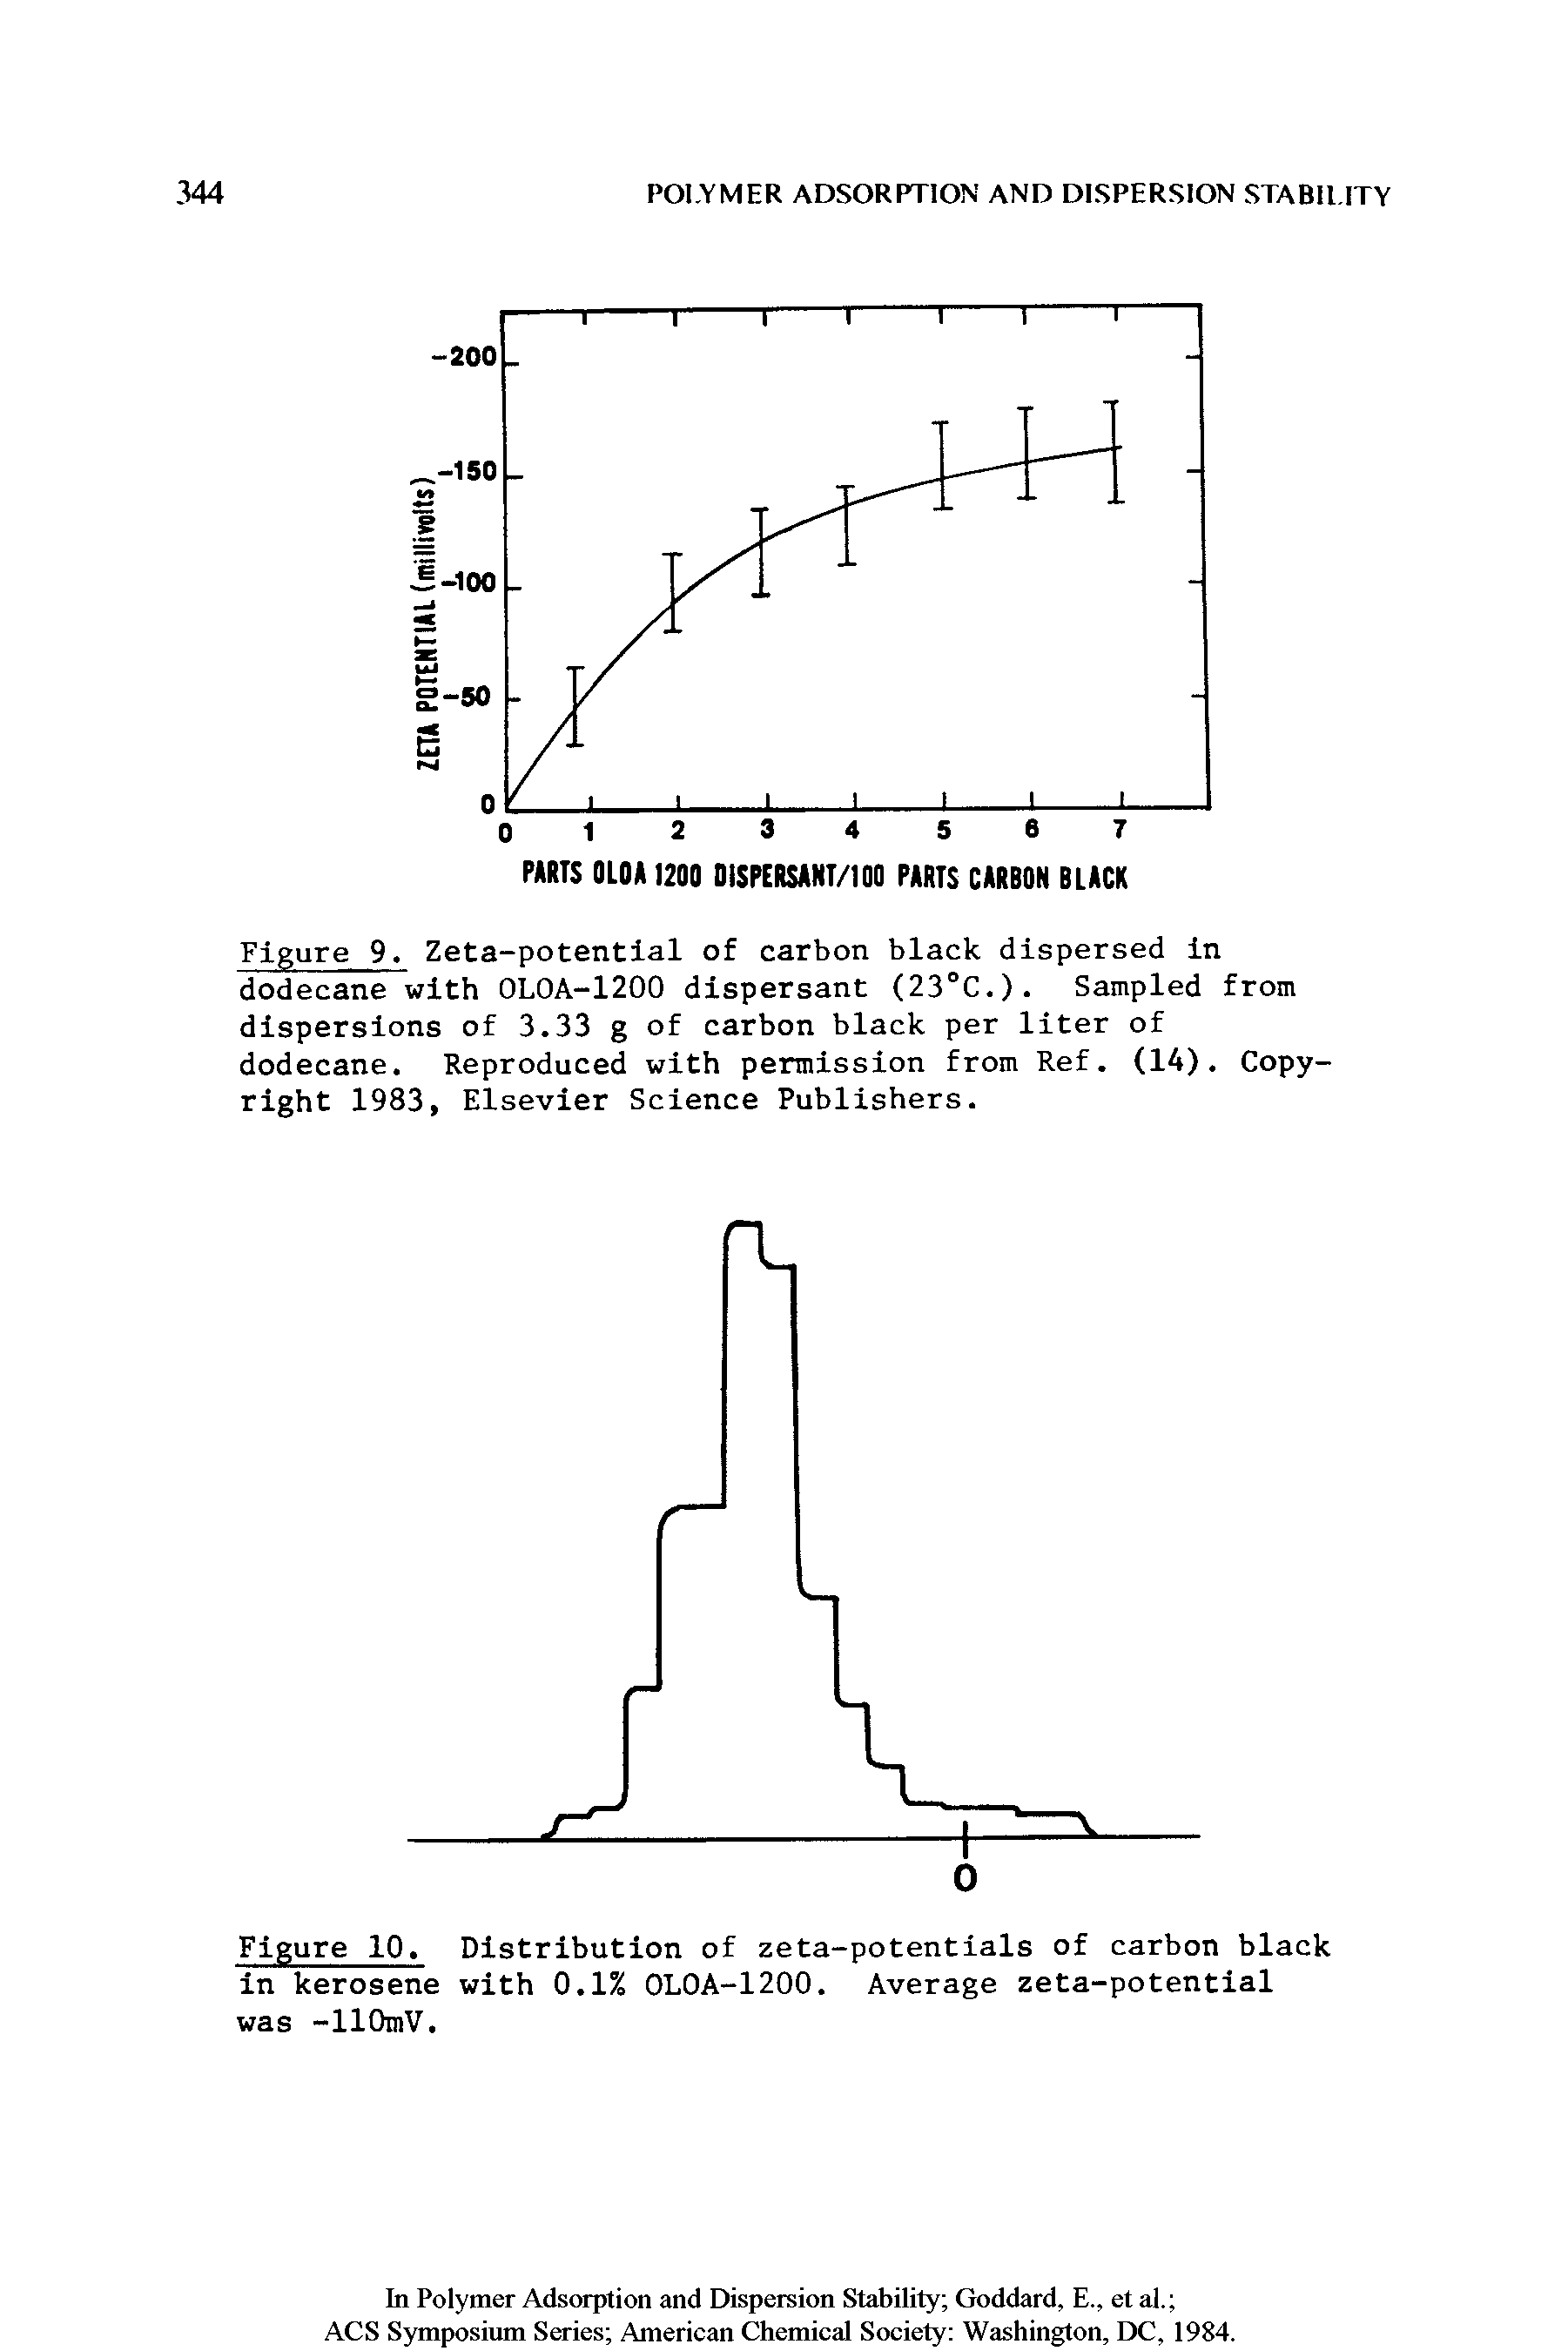 Figure 9. Zeta-potential of carbon black dispersed in dodecane with OLOA-1200 dispersant (23°C.). Sampled from dispersions of 3.33 g of carbon black per liter of dodecane. Reproduced with permission from Ref. (14). Copyright 1983, Elsevier Science Publishers.